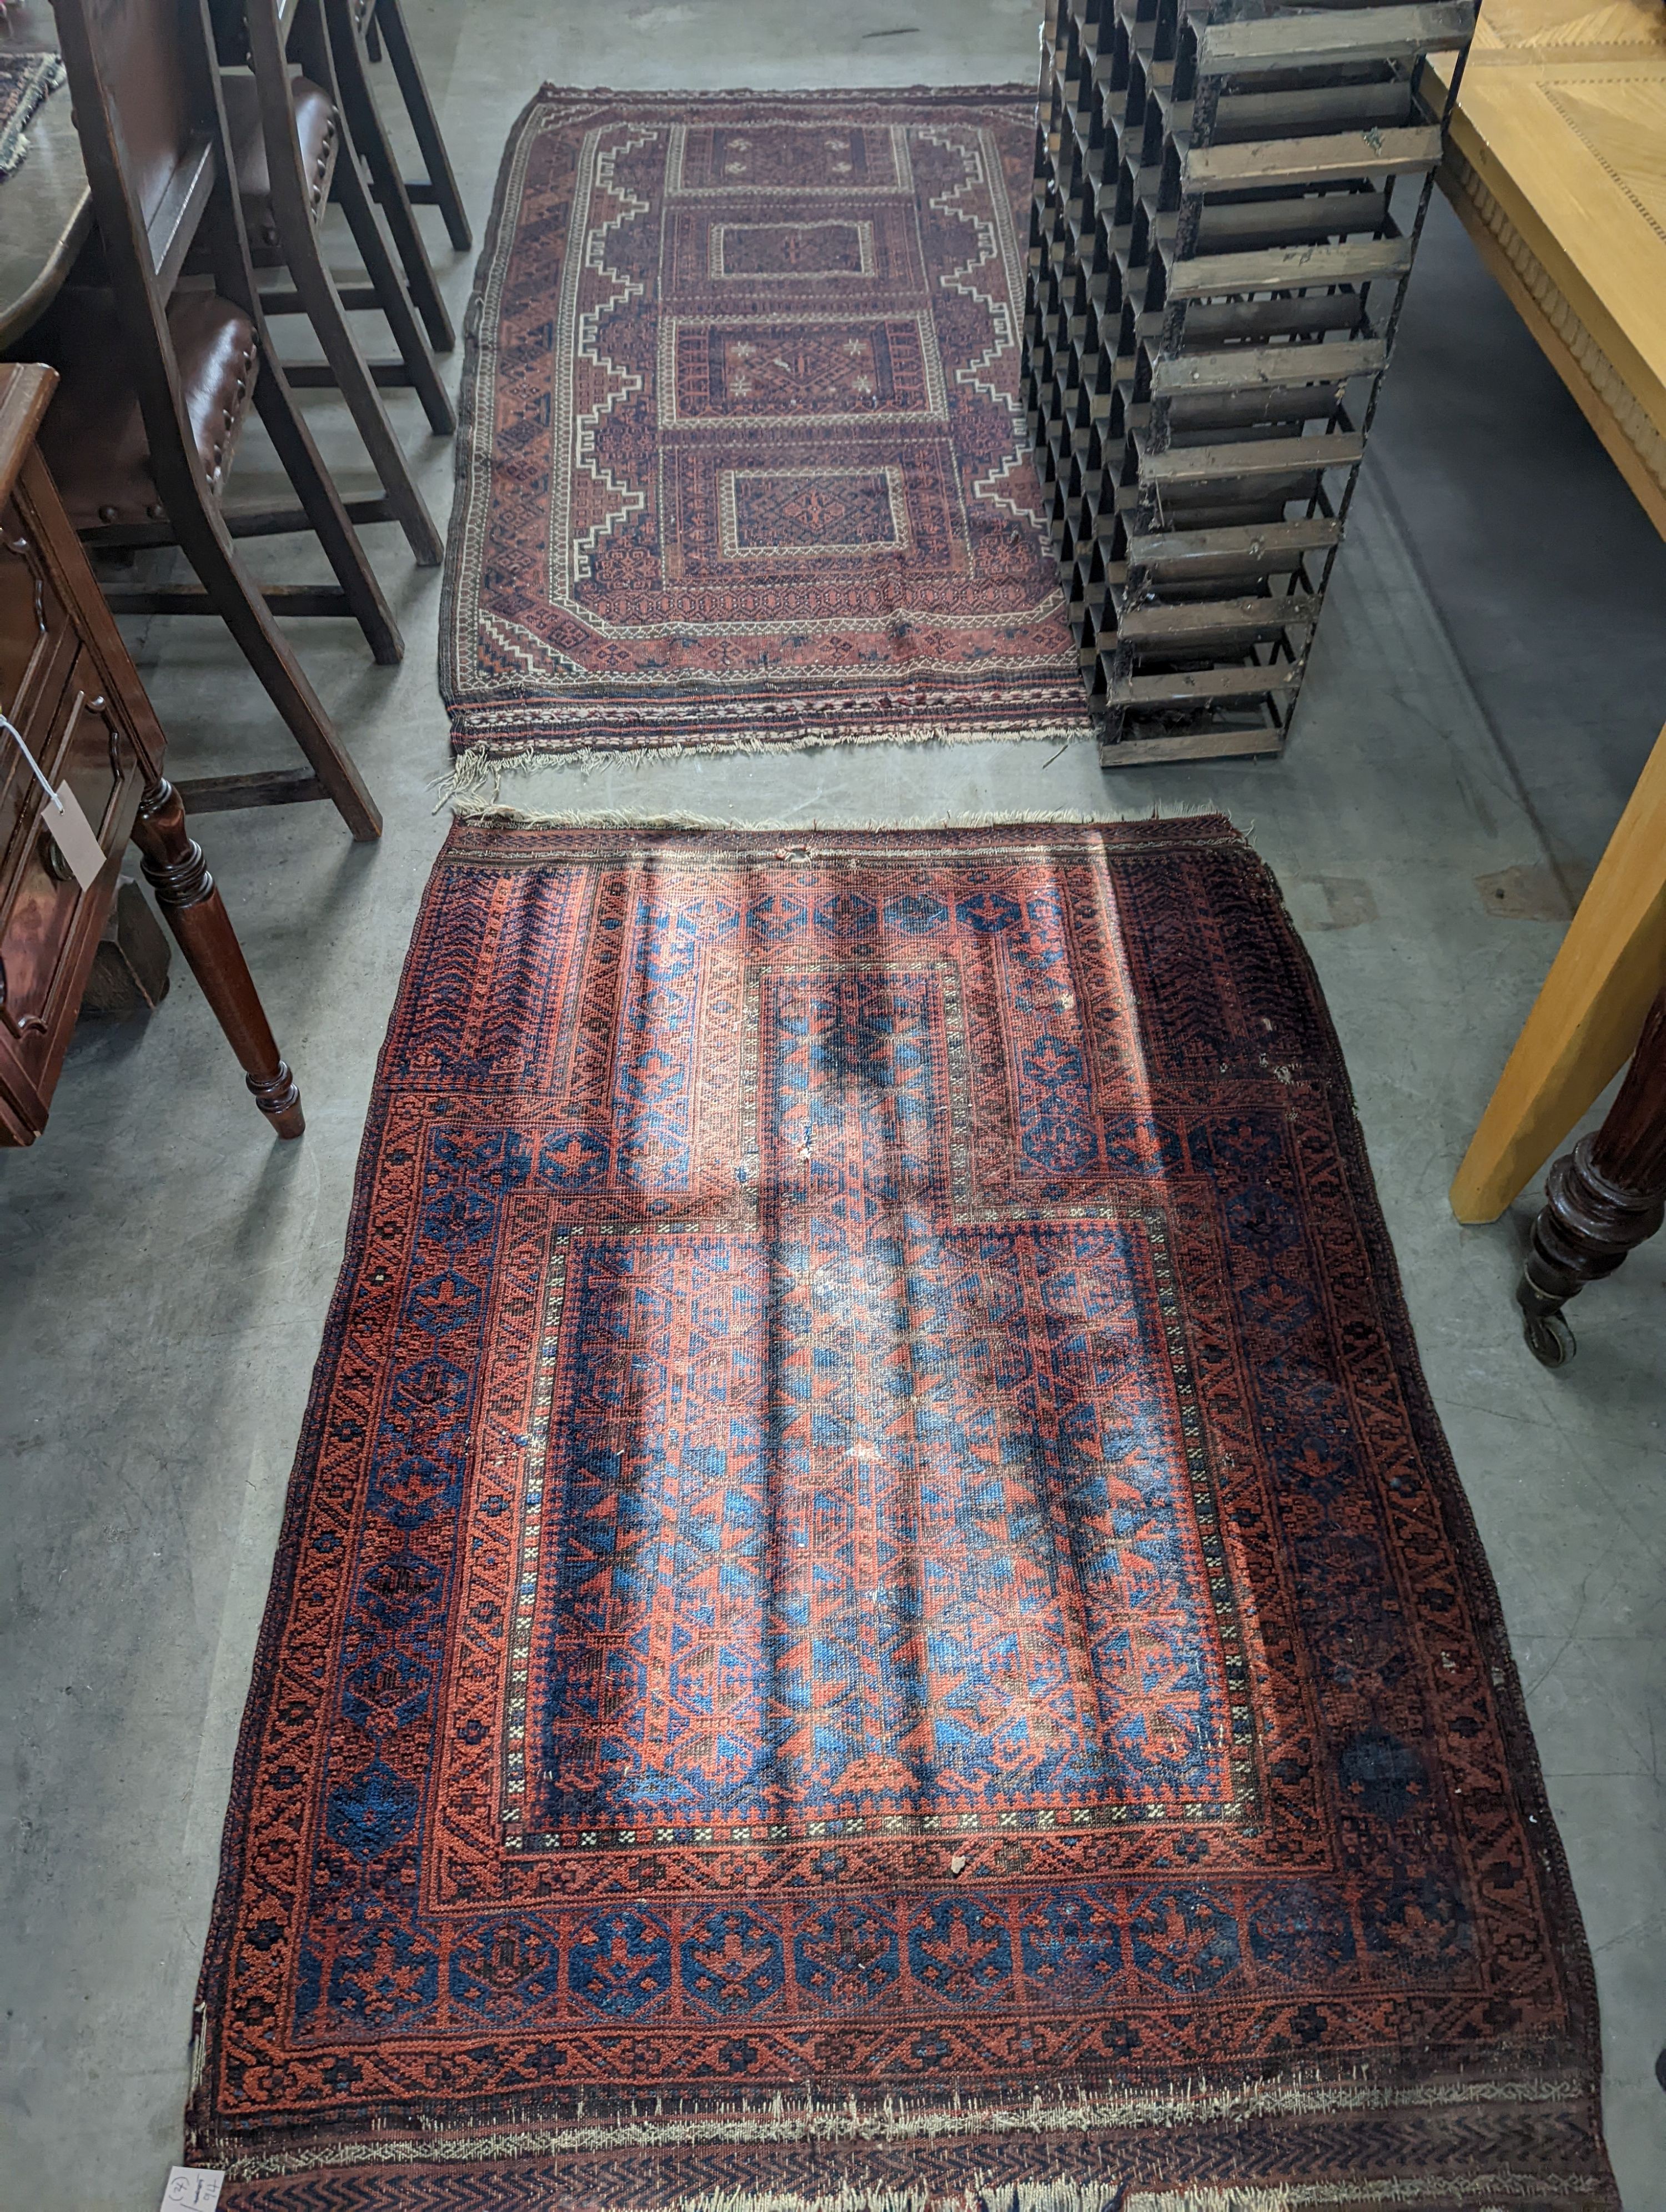 Two Belouch rugs and two prayer mats, largest 200 x 110cm